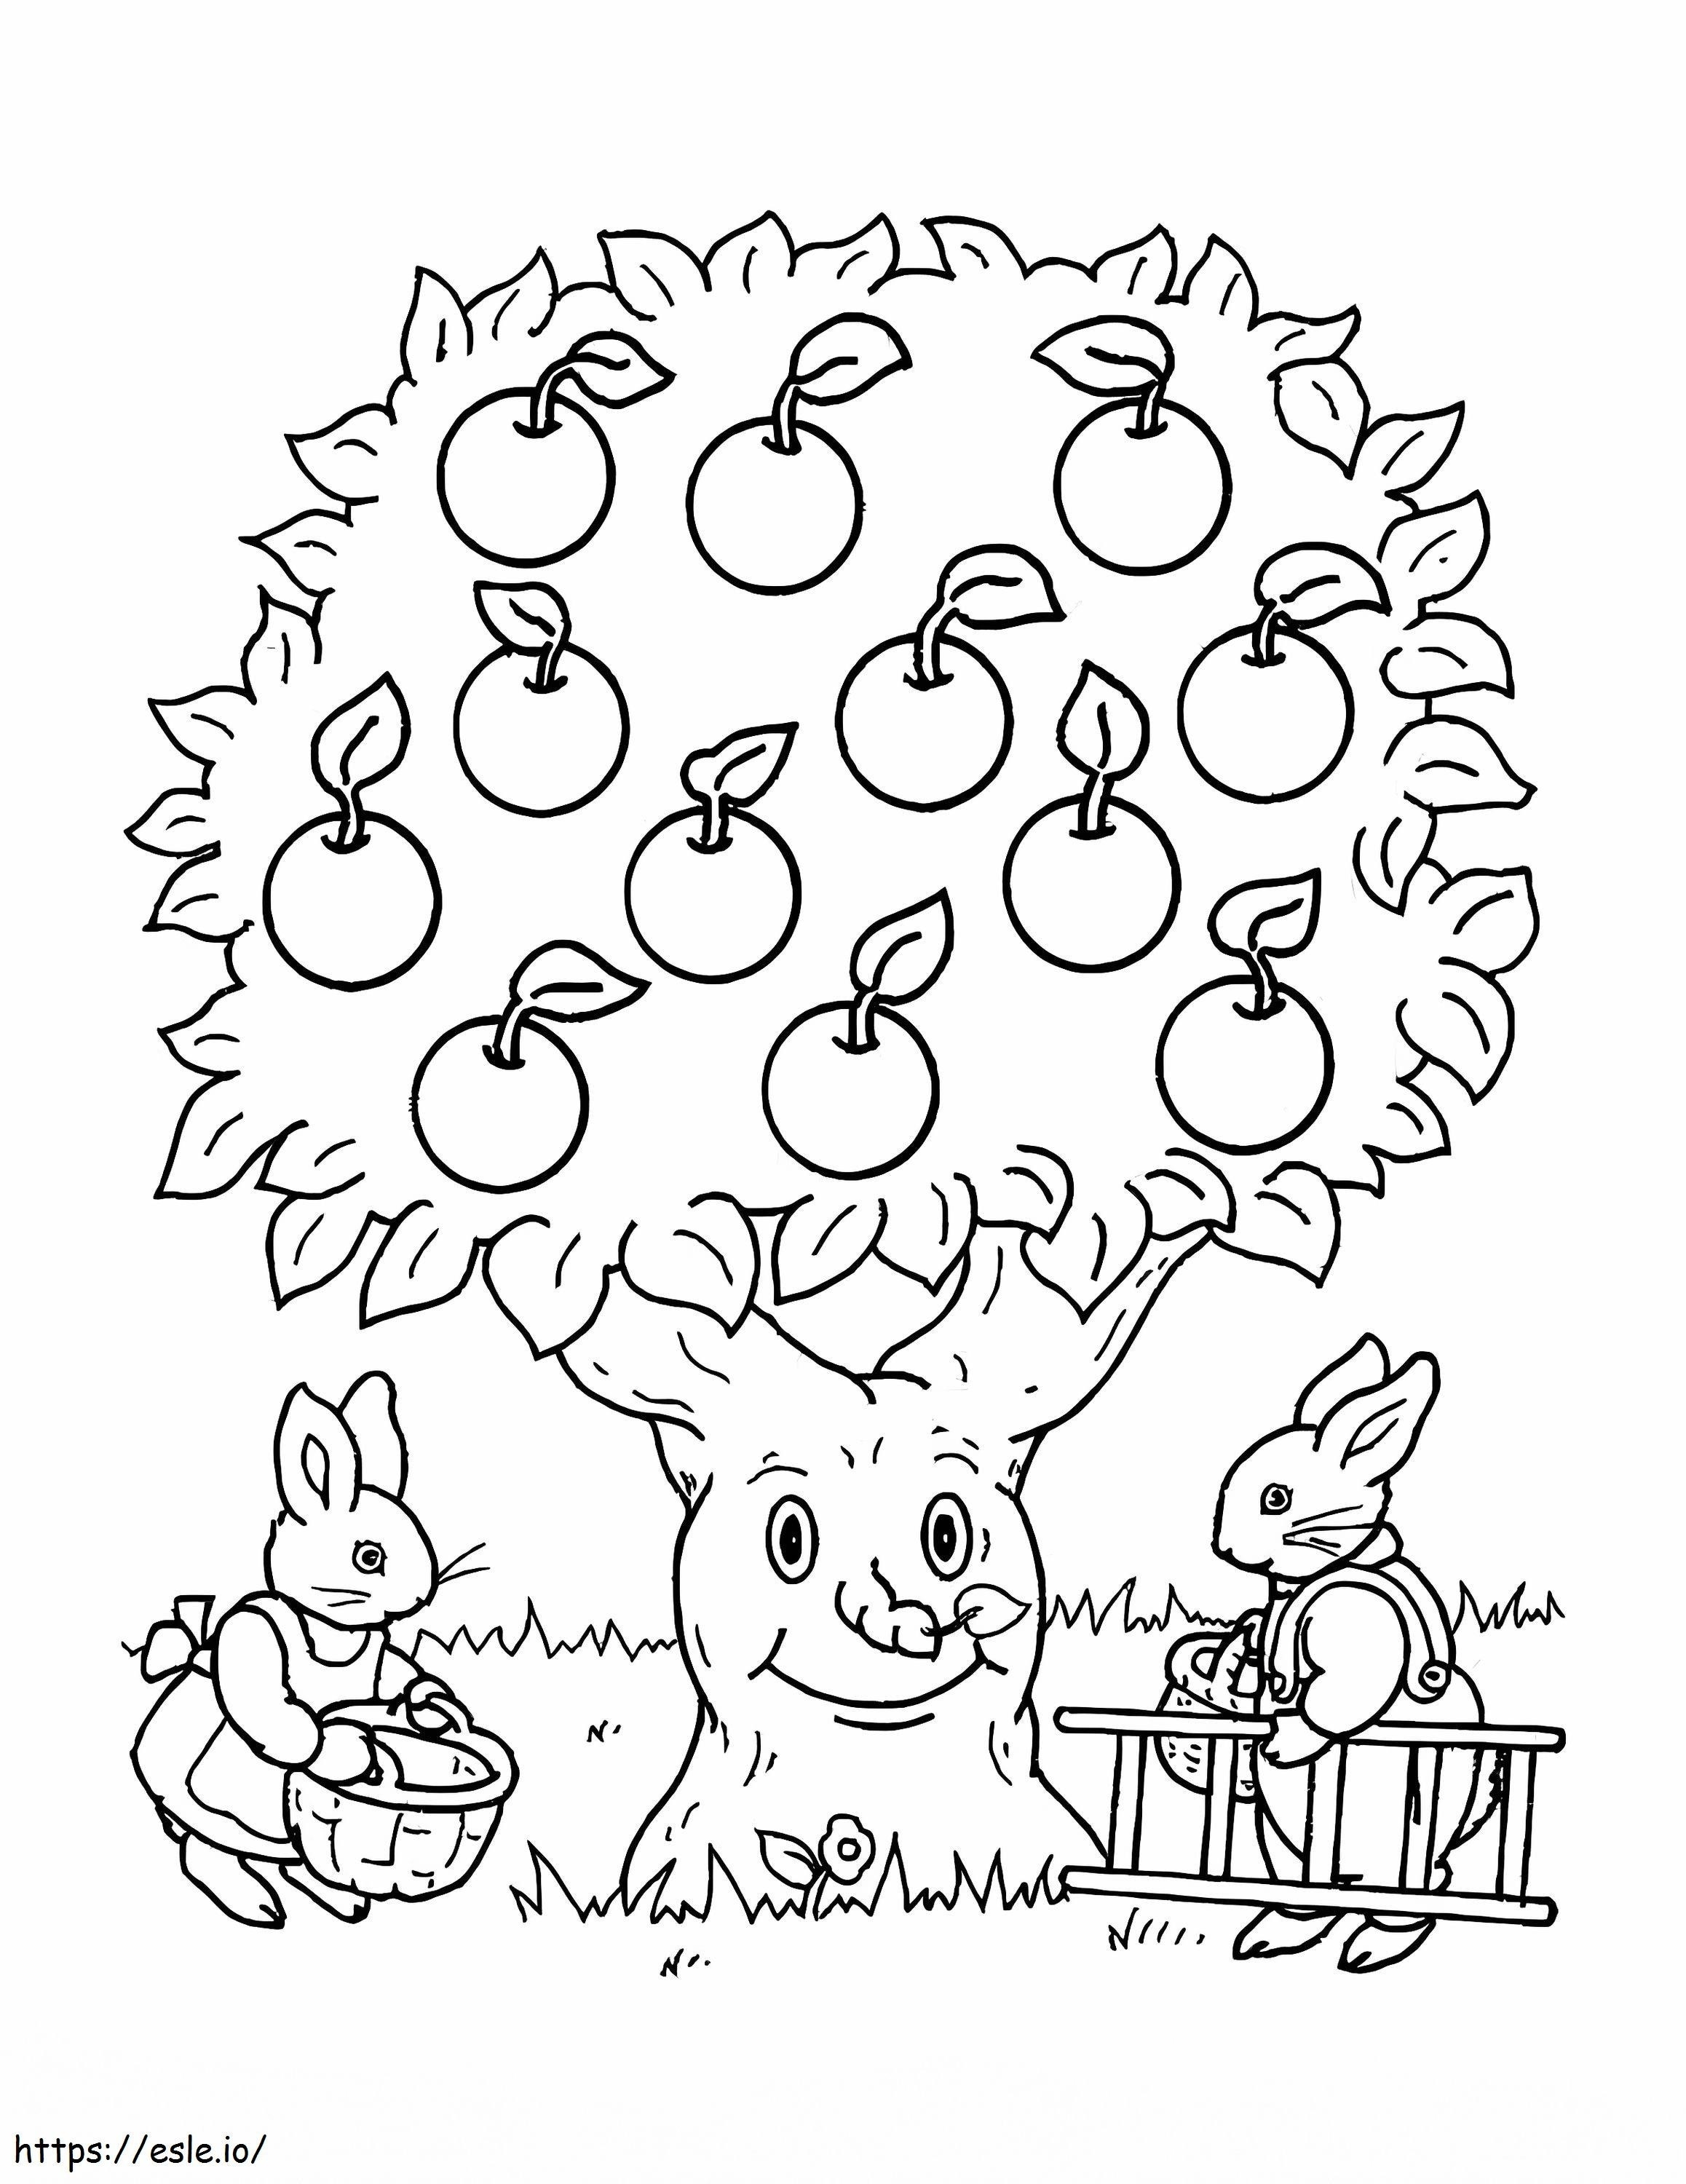 The Apple Tree coloring page